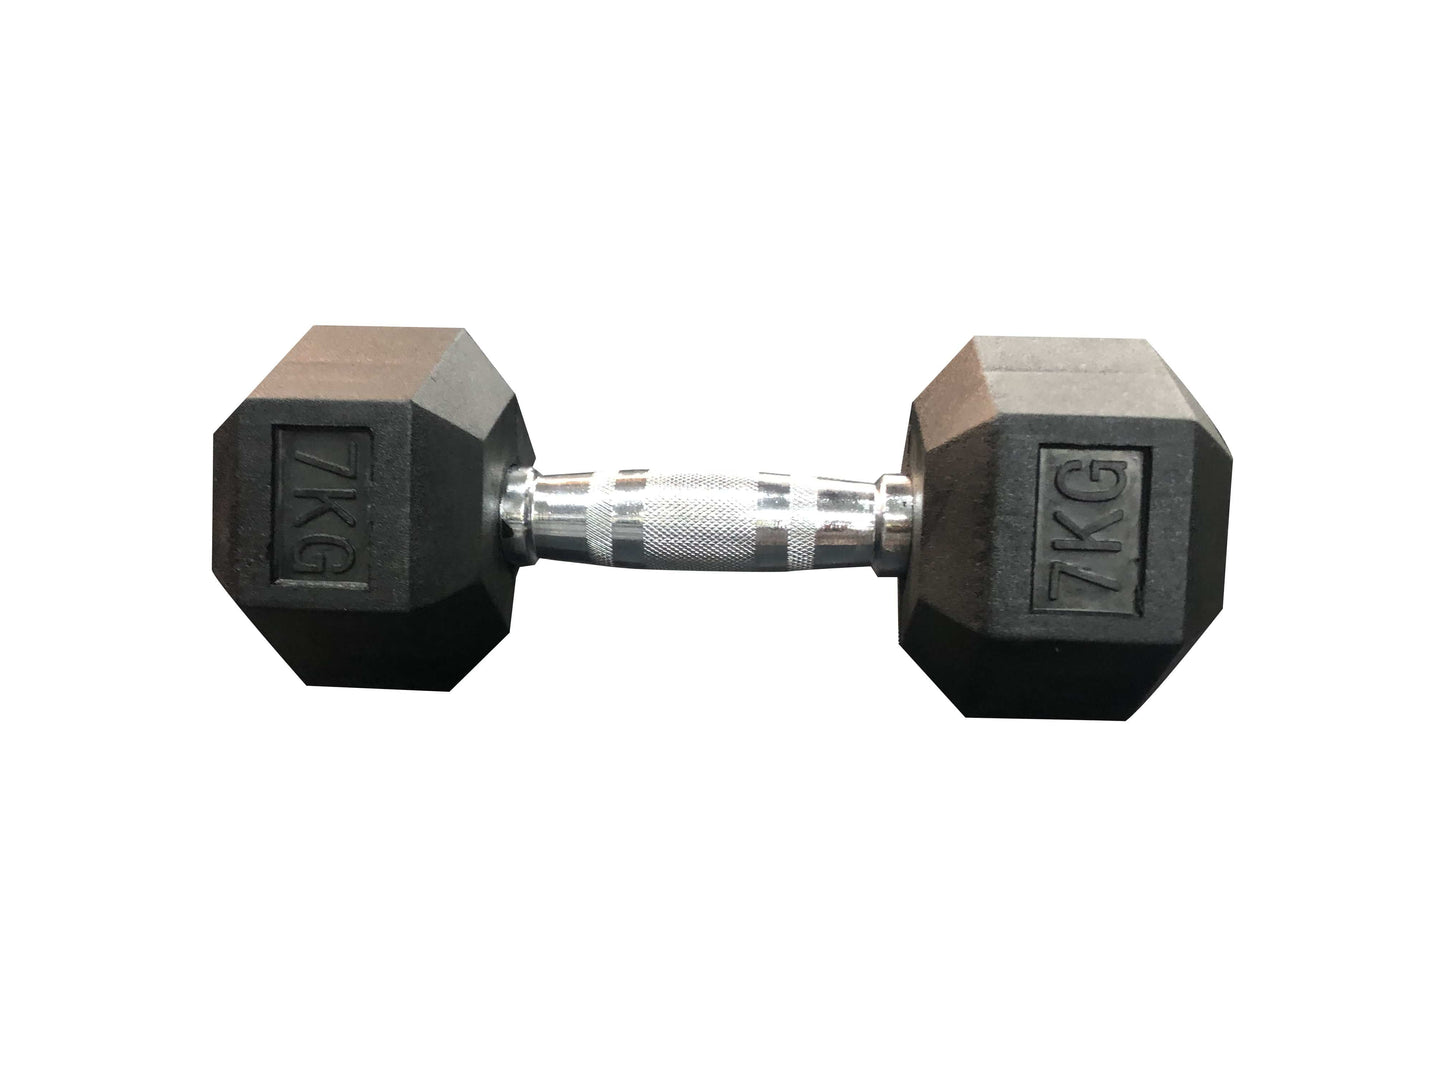 Irm-Fitness Factory Rubber Hex Dumbbell 7Kg Fitness Weight Black